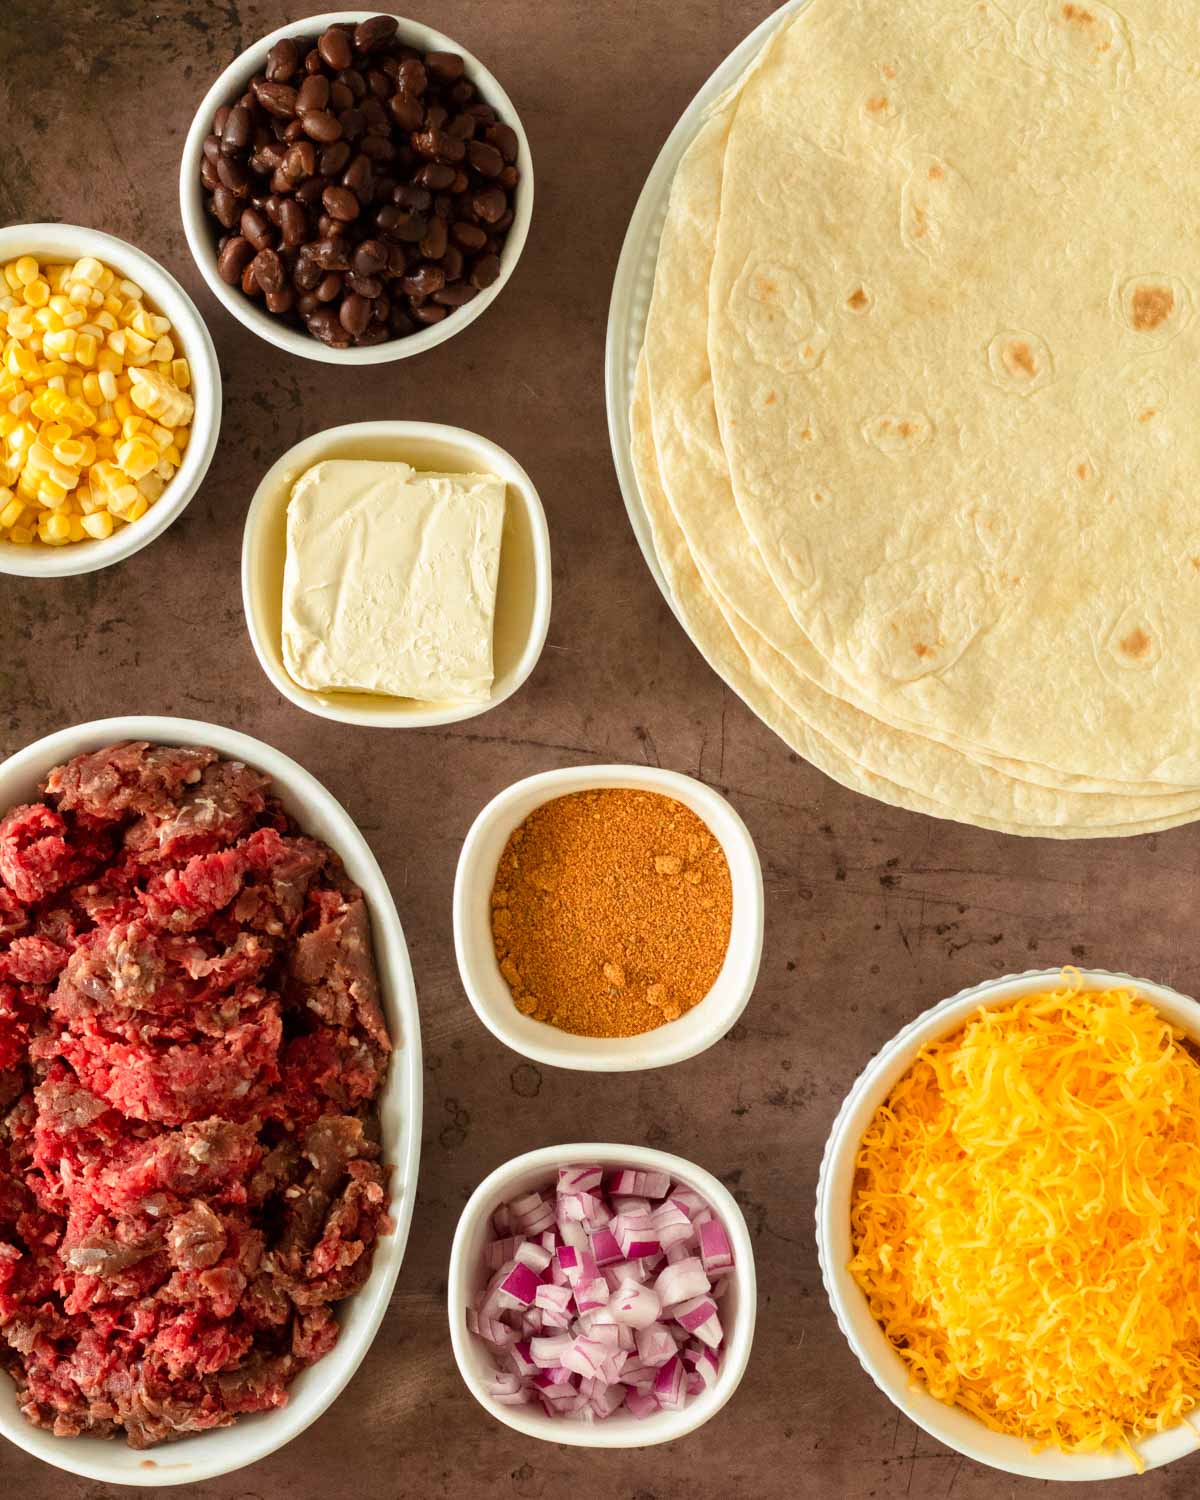 This sheet pan quesadilla is an easy dinner recipe perfect for a quick weeknight meal and also great for a fun appetizer. Made with tortillas loaded with a flavorful mixture of ground beef, vegetables, and cheese and baked until crispy, this sheet pan beef quesadilla is a crowd-pleaser.